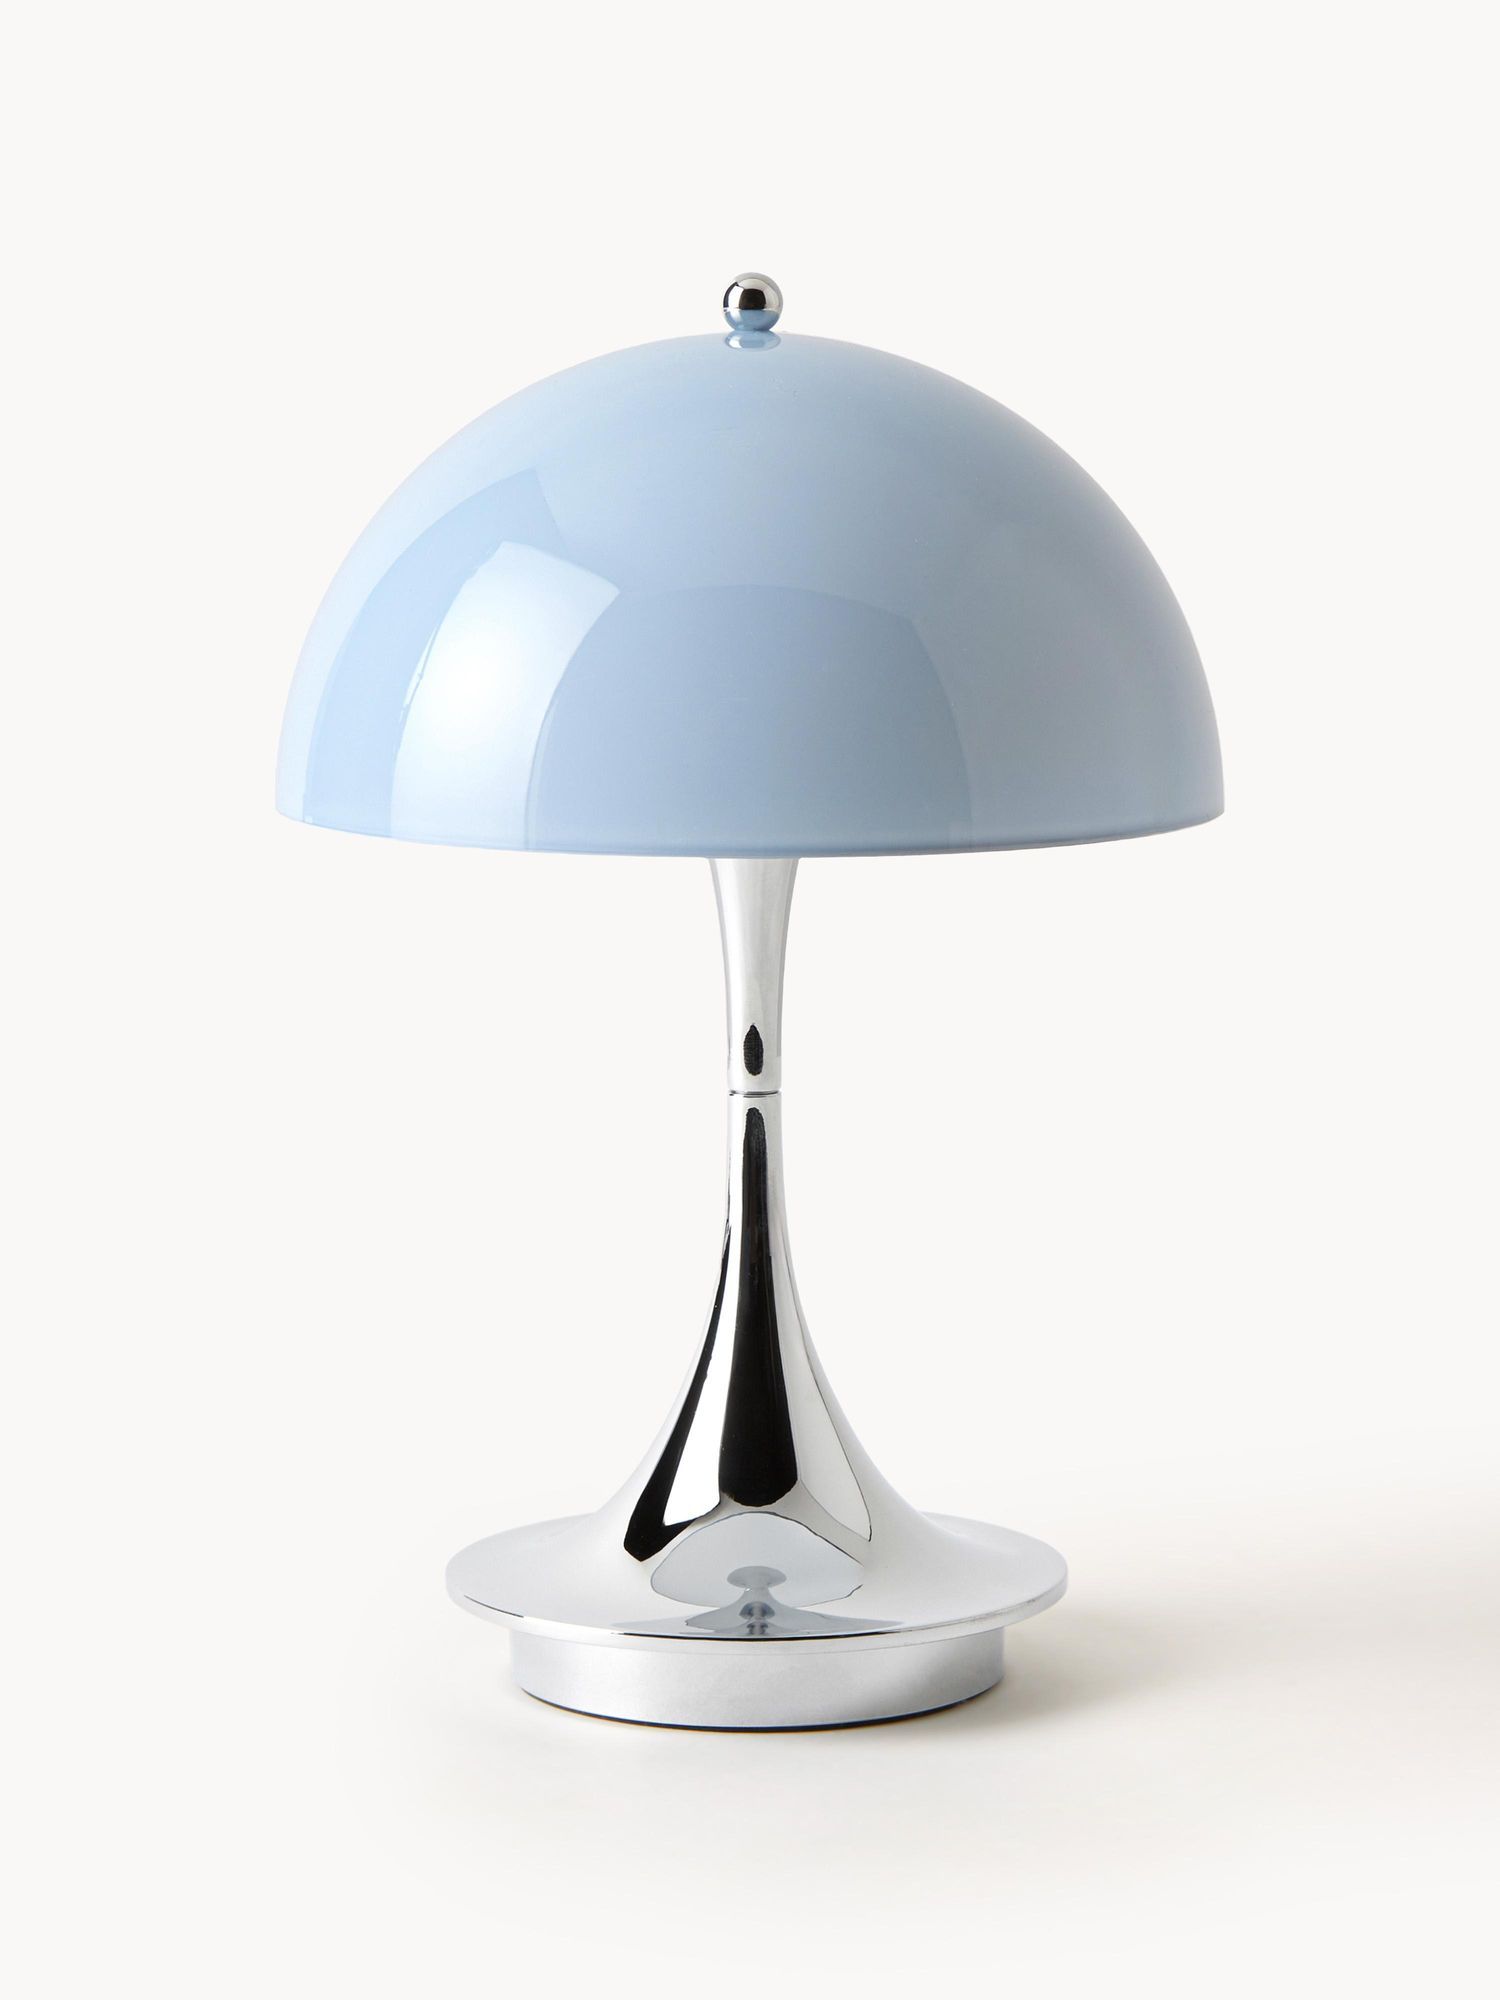 The Panthella mobile dimmable LED table lamp